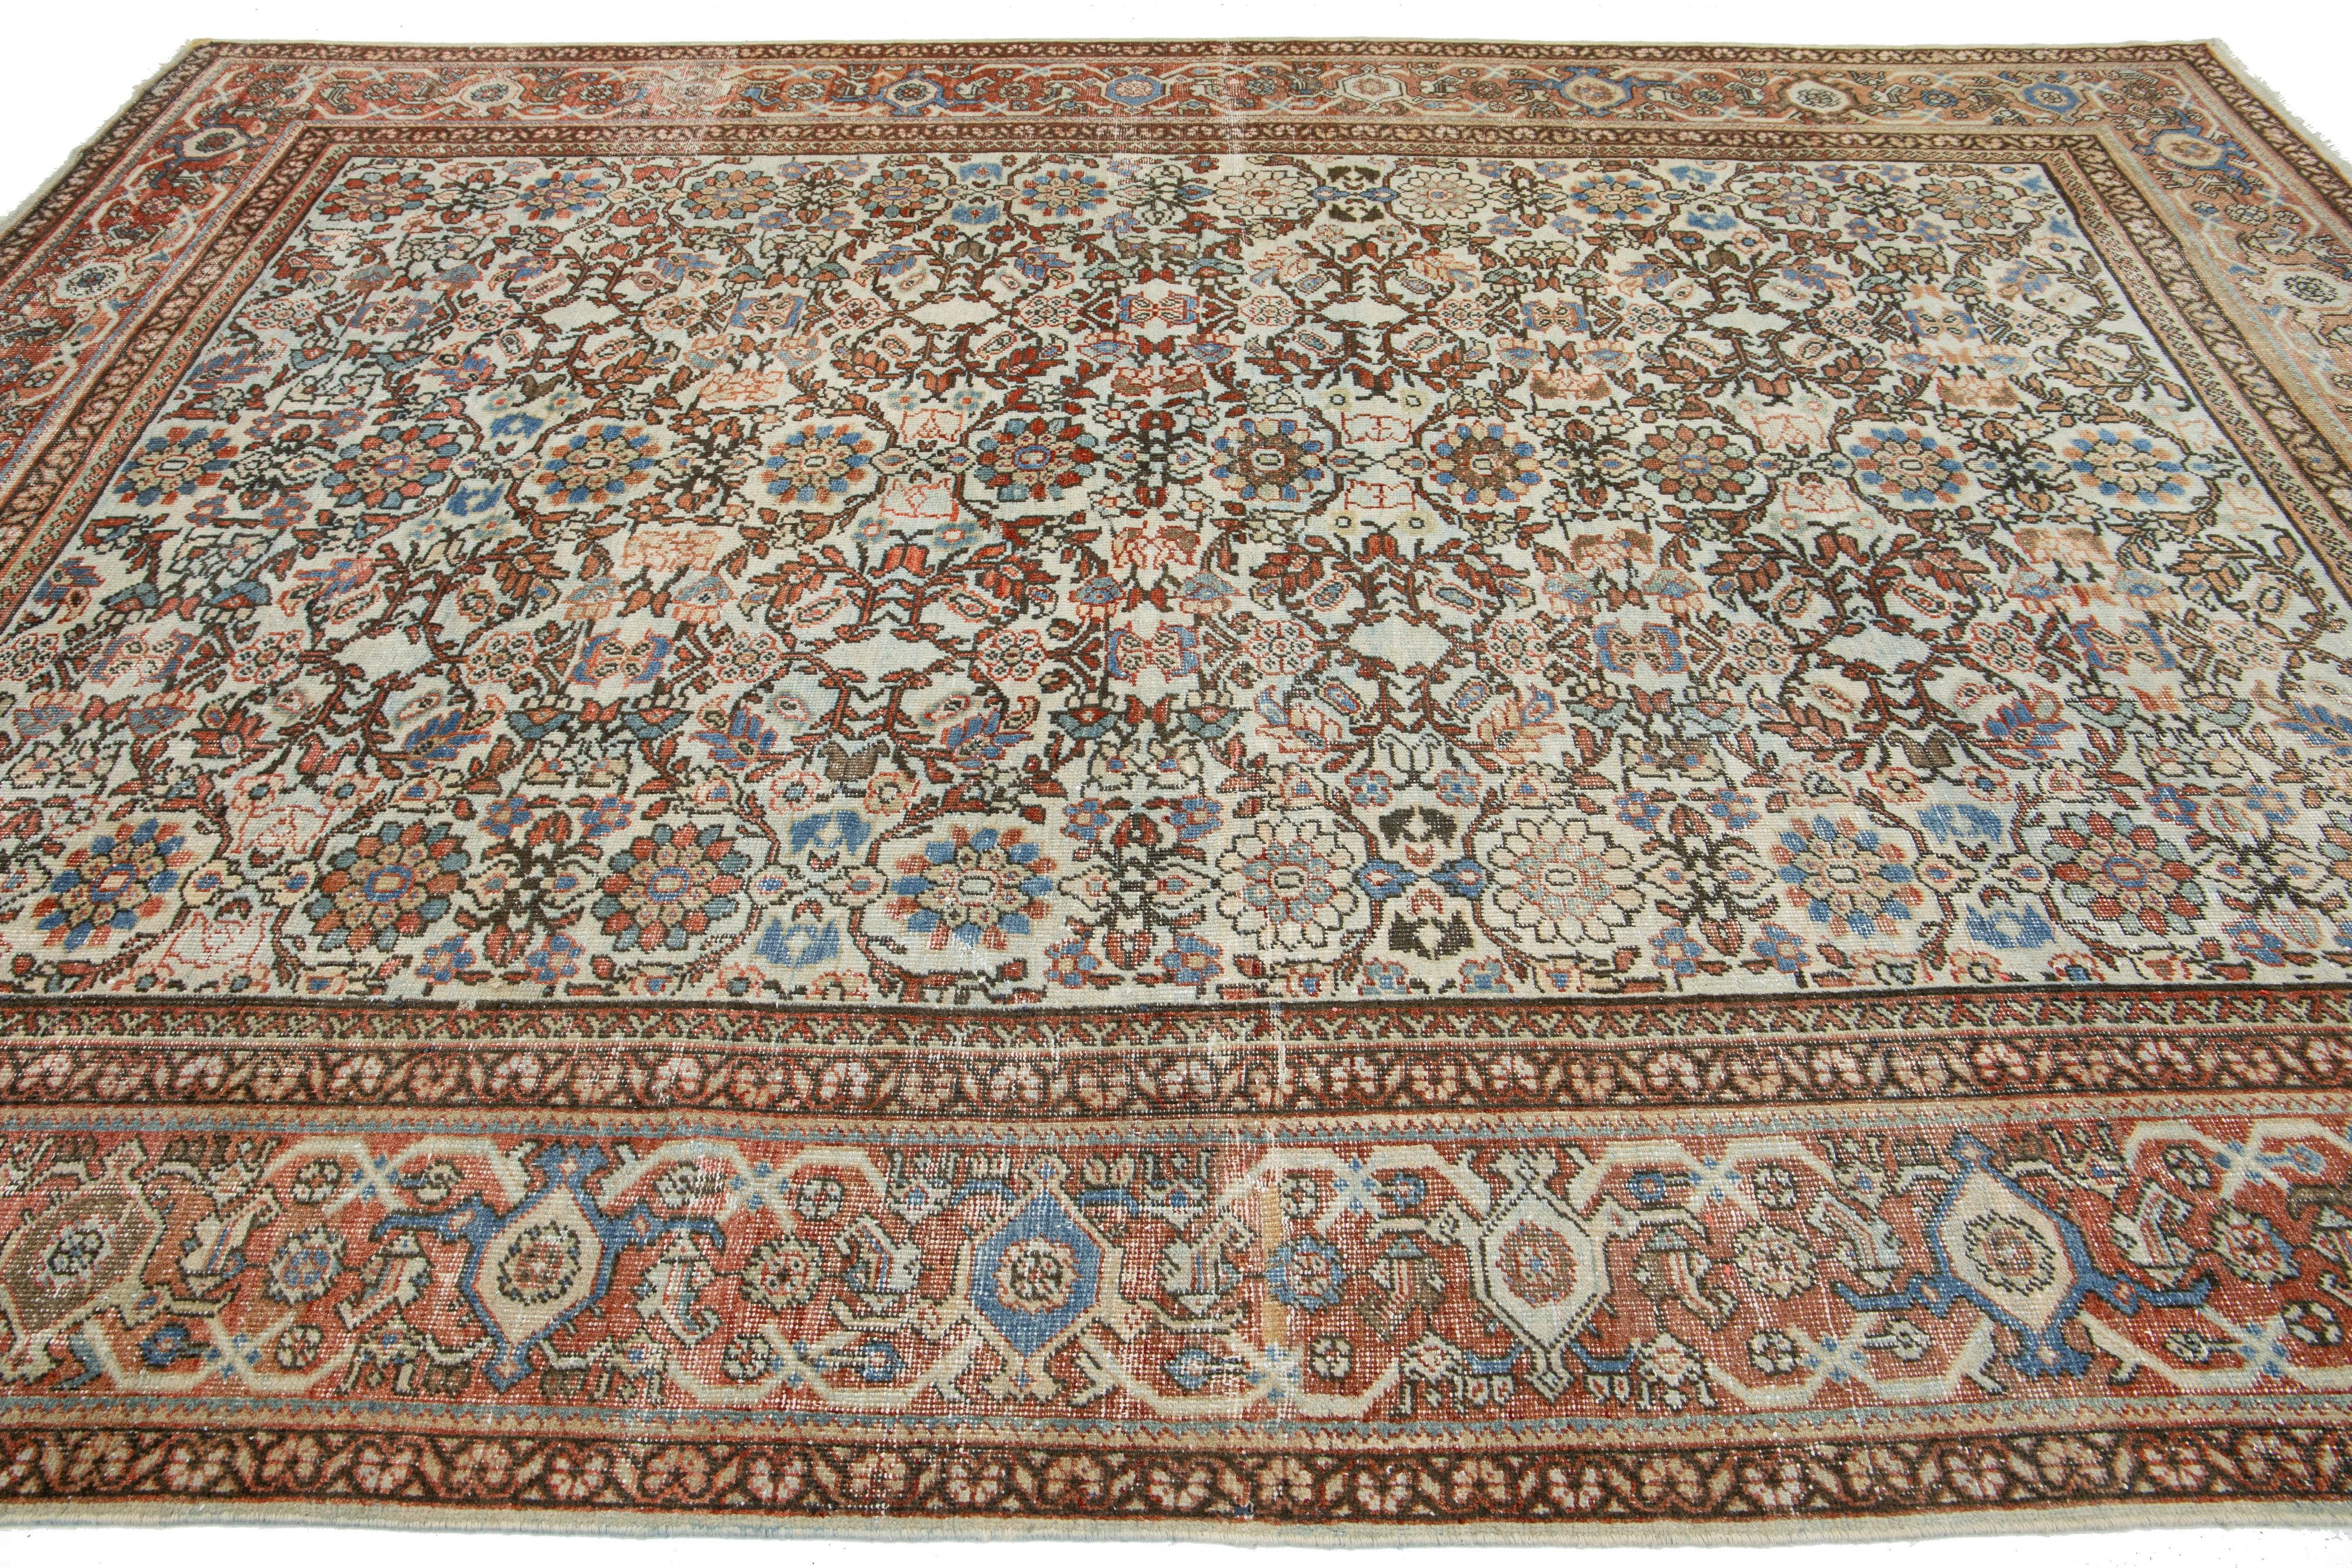 20th Century Handmade Multicolor Persian Mahal Designed Wool Rug From the 1910s For Sale